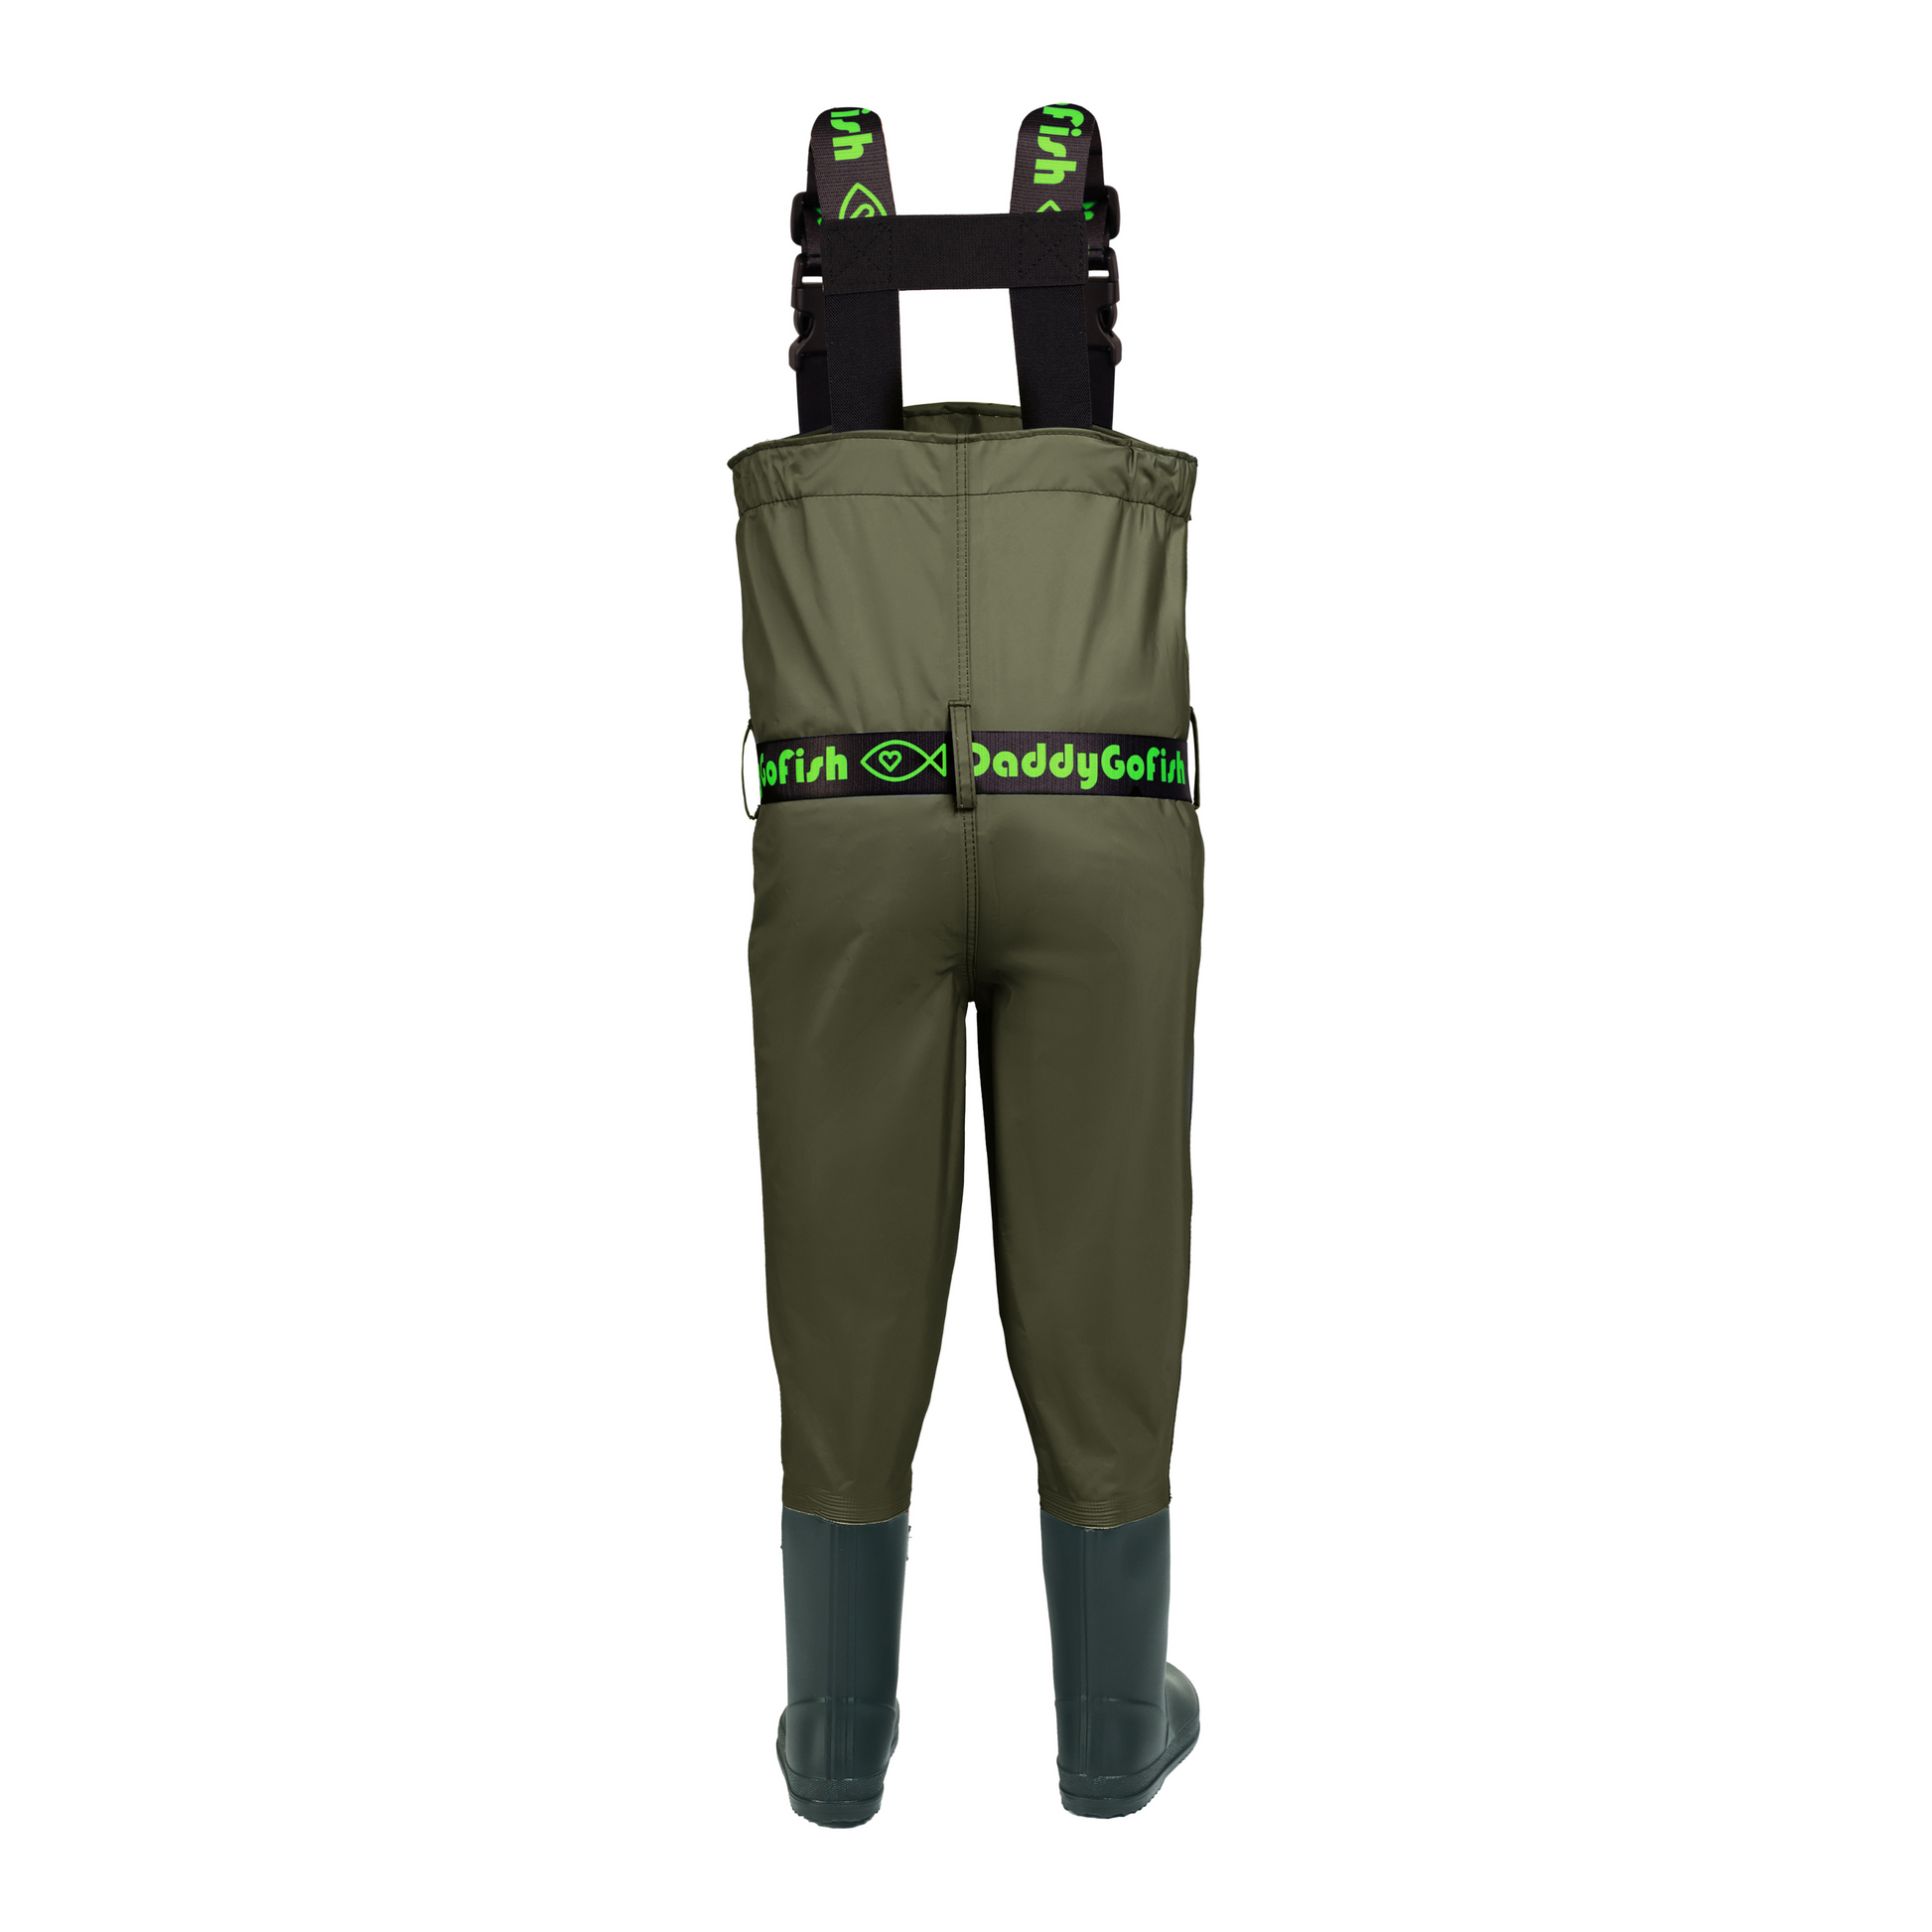 Adult PVC Chest Waders, Waders for Men, Waders for Women, Hunting, Fis –  DaddyGoFish